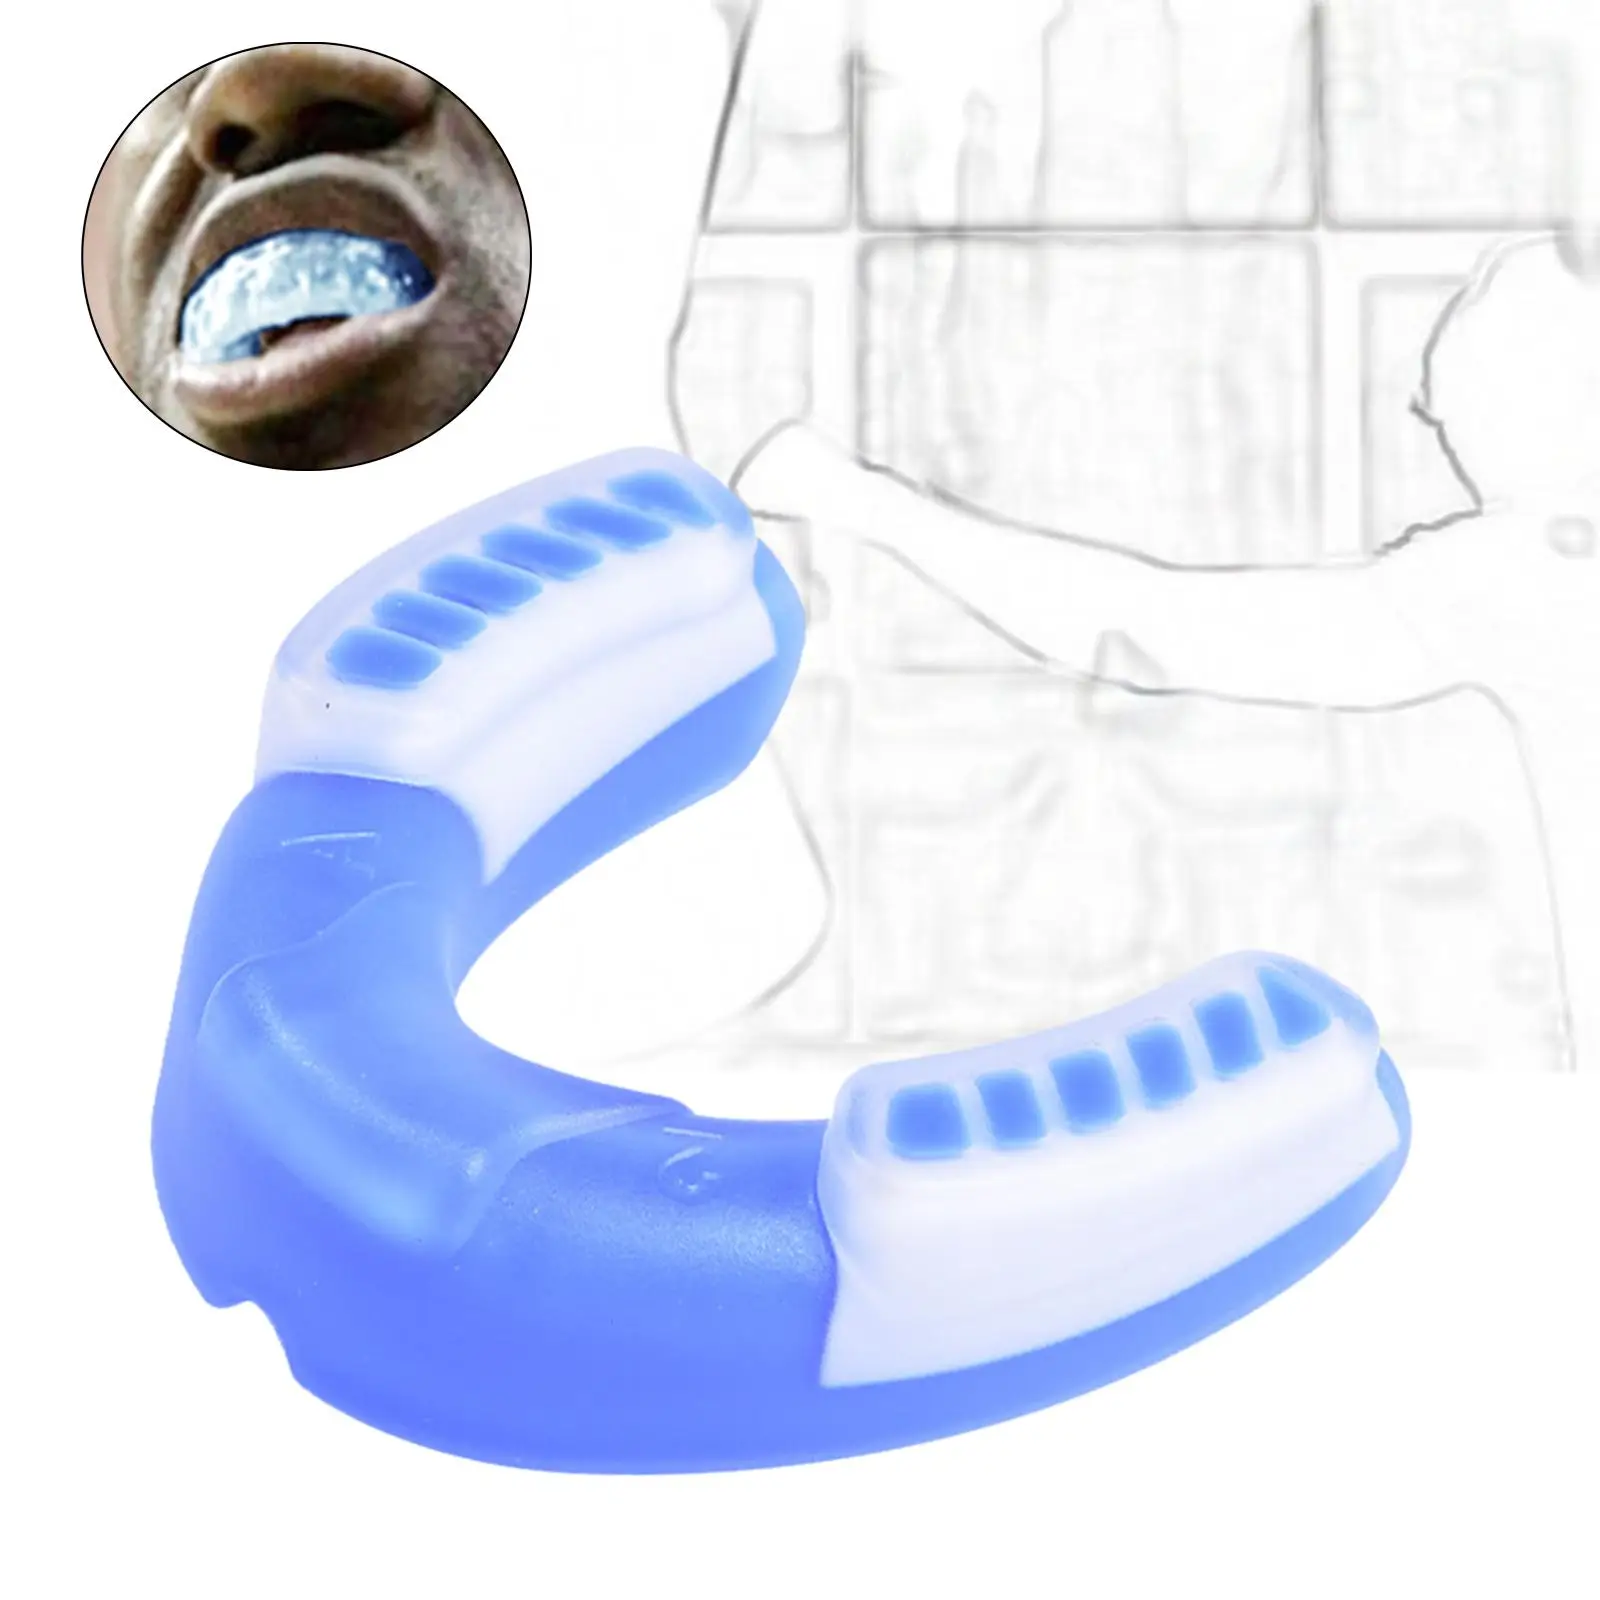 Mouth Guard Sparring Professional Mouthguard Men Women Soft Mouth Protector for Softball Kickboxing Boxing Football Taekwondo